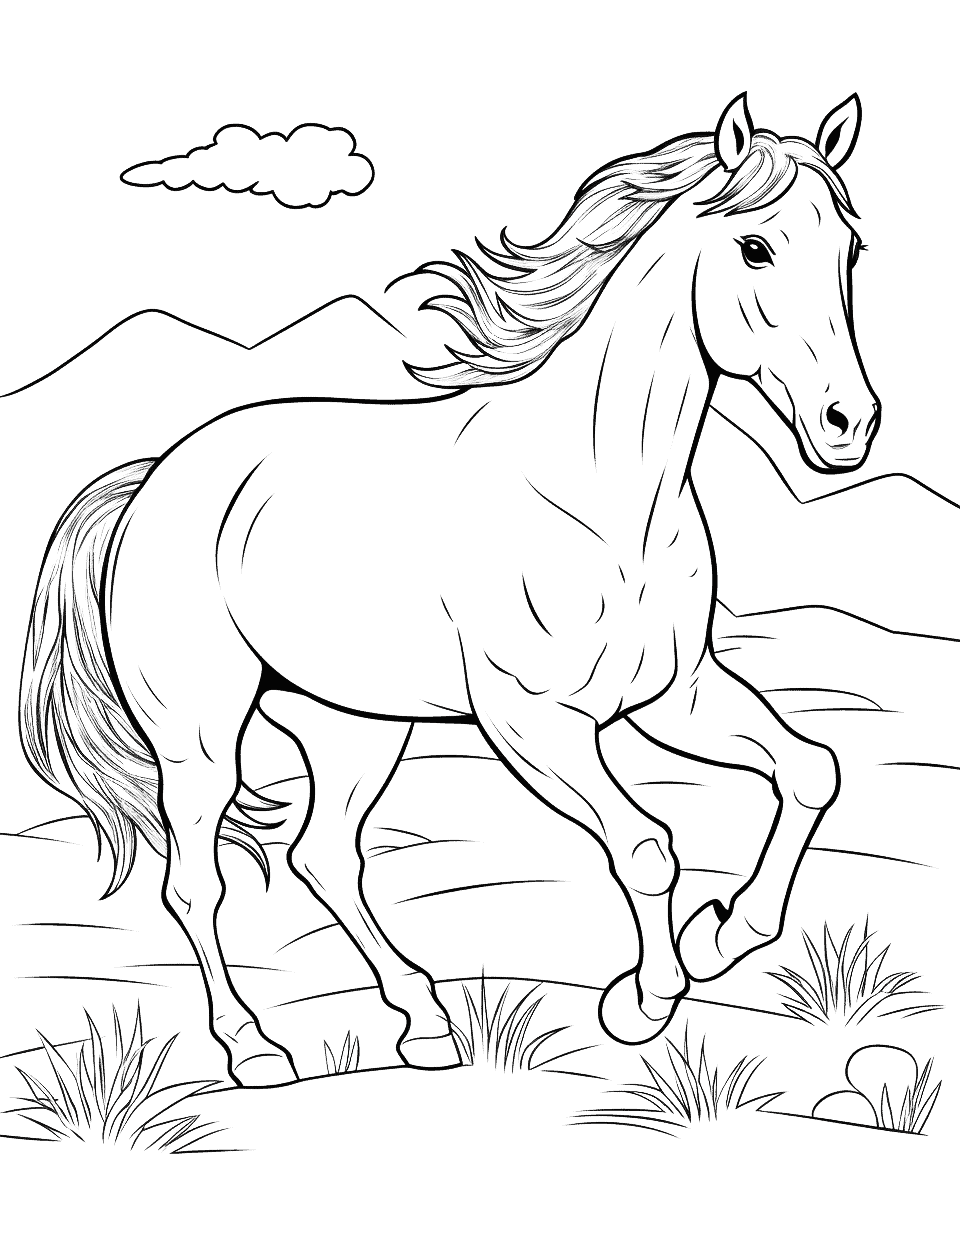 Full Page Detailed Horse Coloring Page - A full-page, detailed drawing of a horse, perfect for kids who love to color.